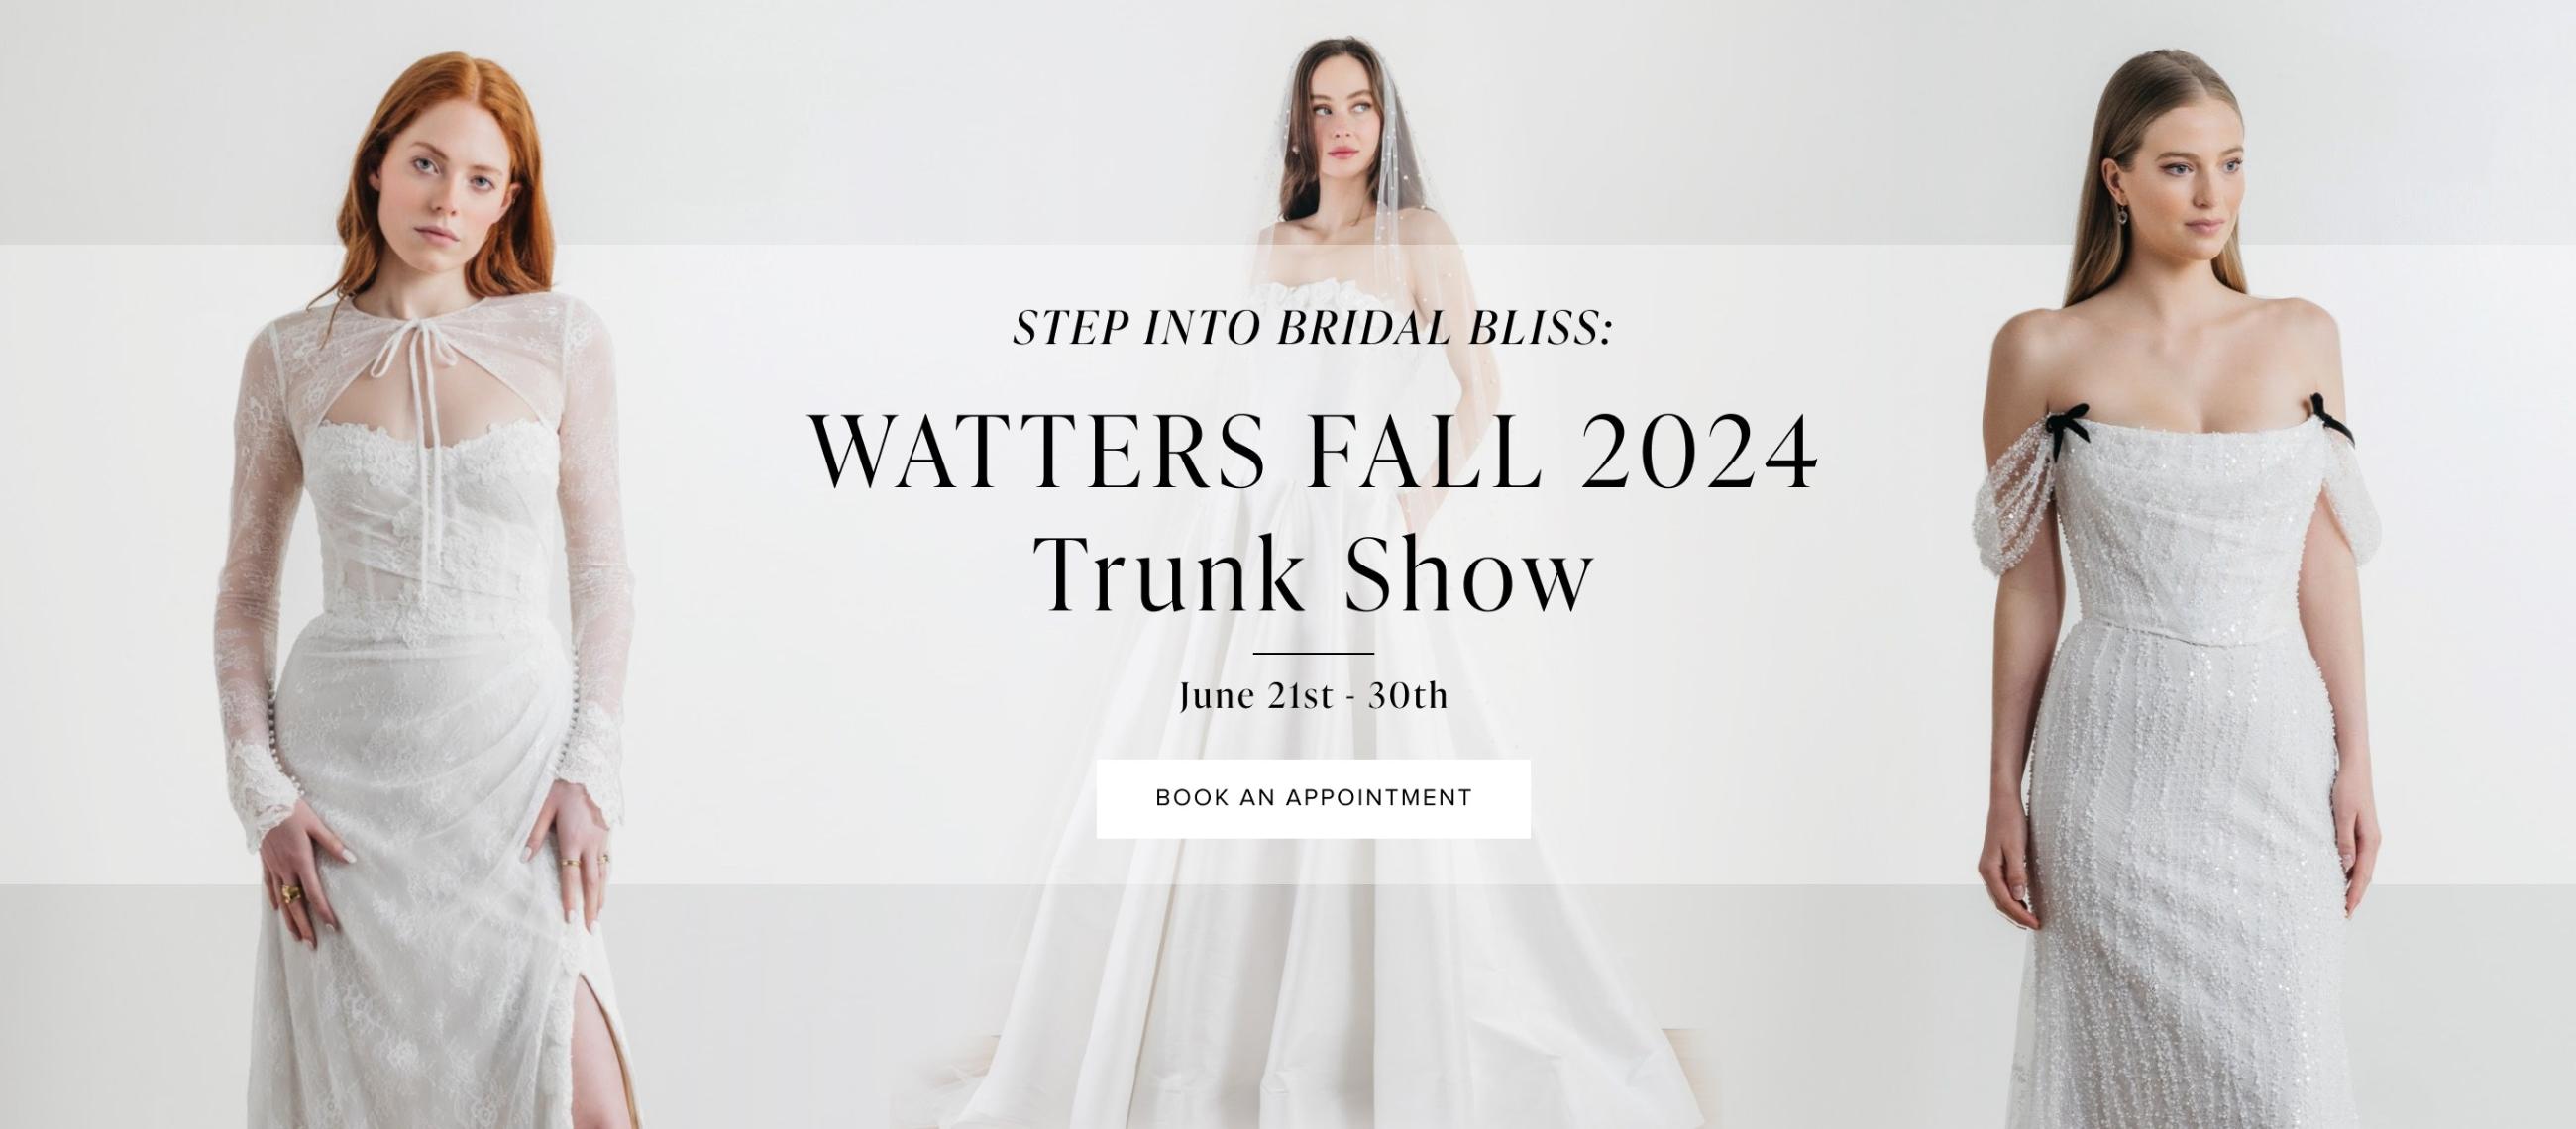 The White Gown Presents: Watters Fall 2024 Trunk Show | June 21-30